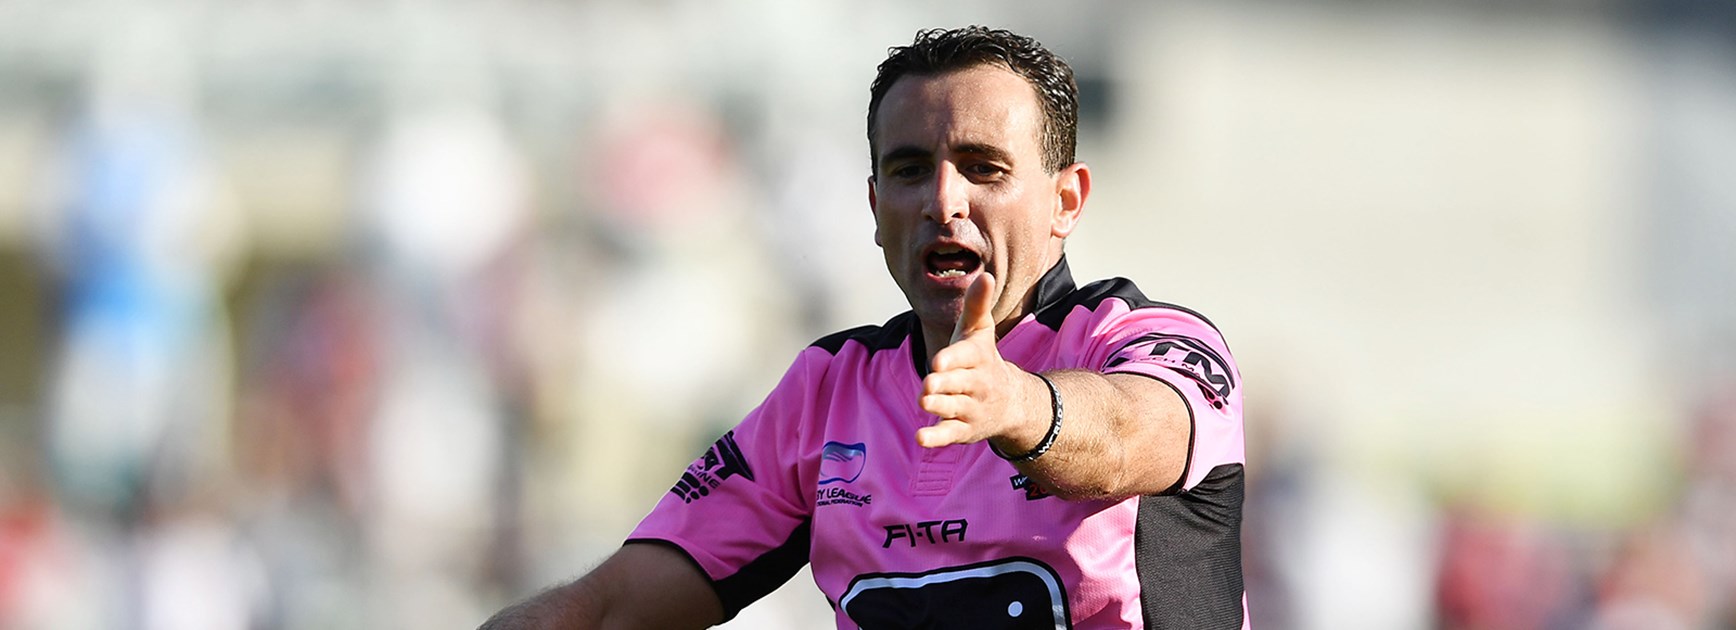 NRL referee Gerard Sutton will take charge of the 2017 Rugby League World Cup final between Australia and England.